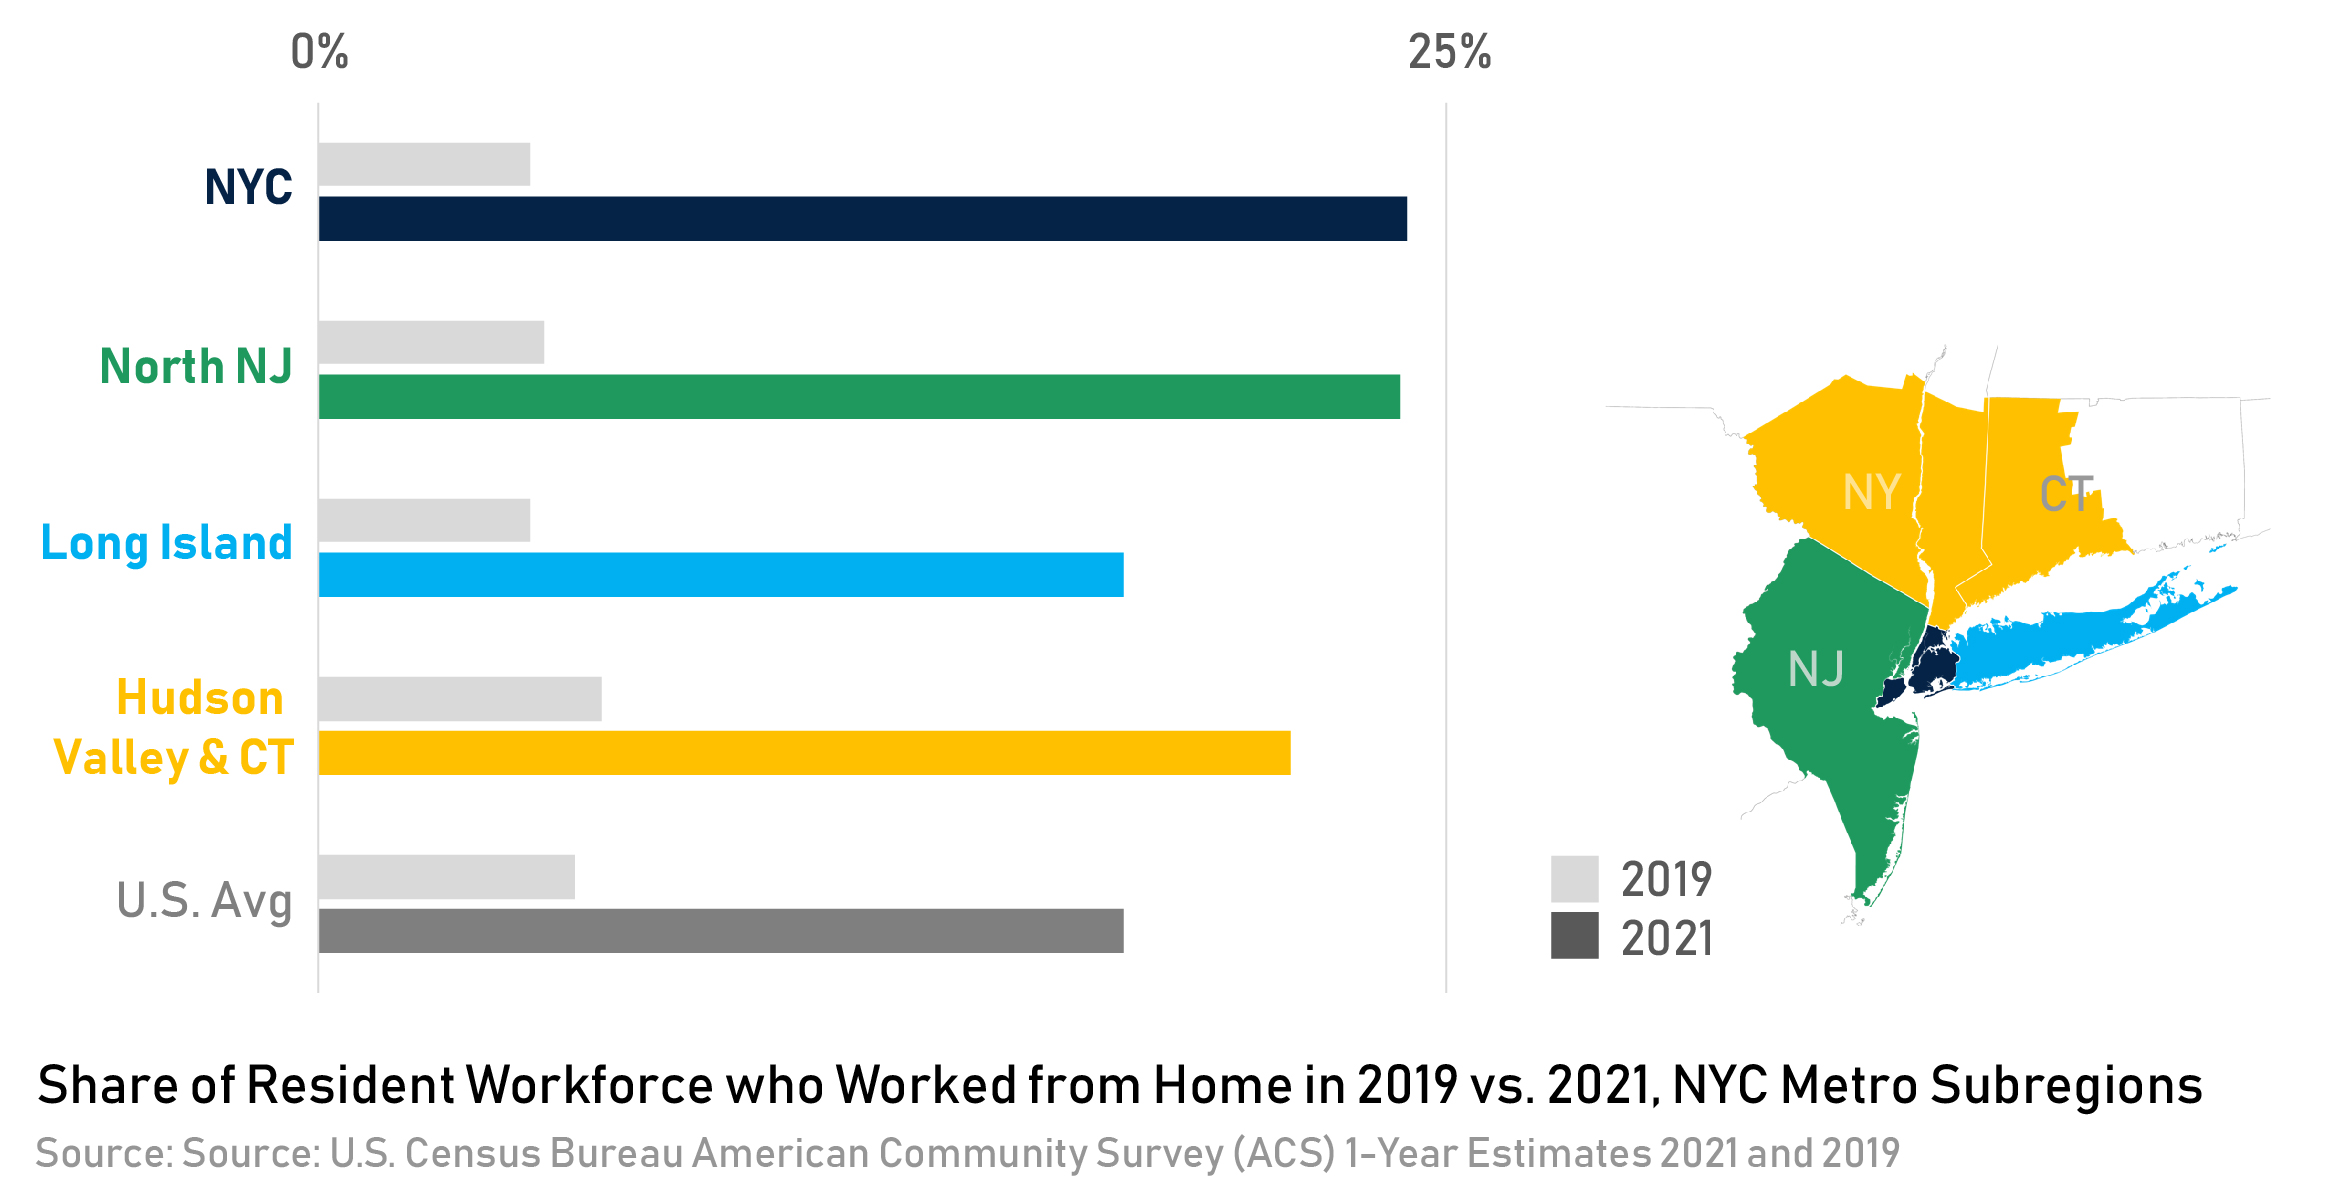 More residents worked from home in 2021 than 2019, consistent with national trends 